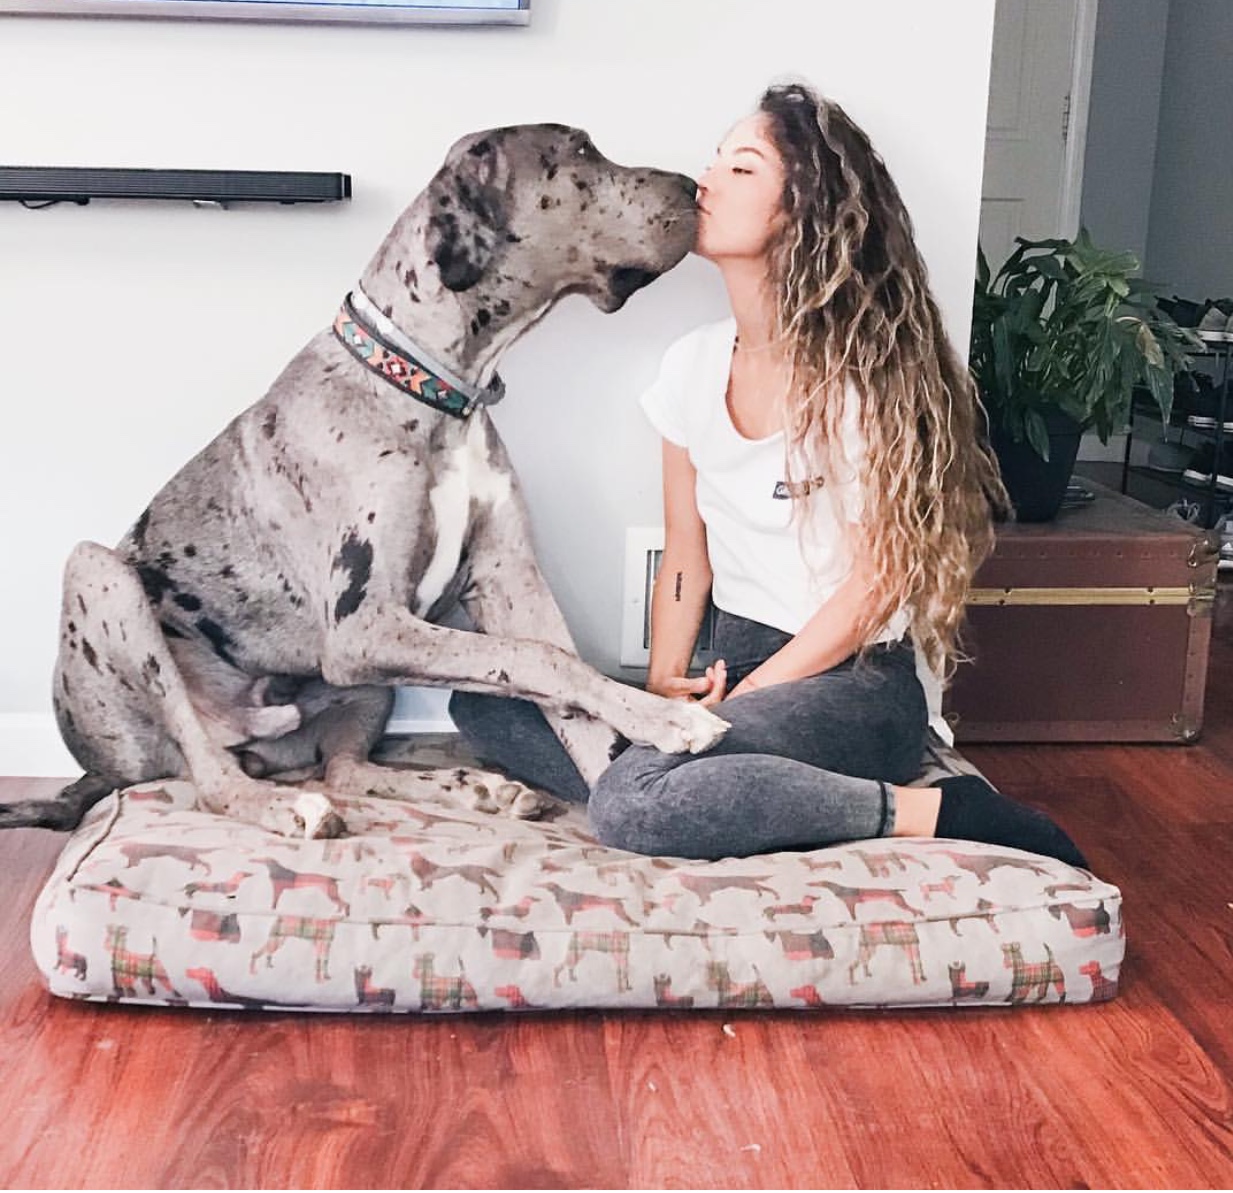 Great Dane sitting on it bed while kissing the woman who is sitting in front of him